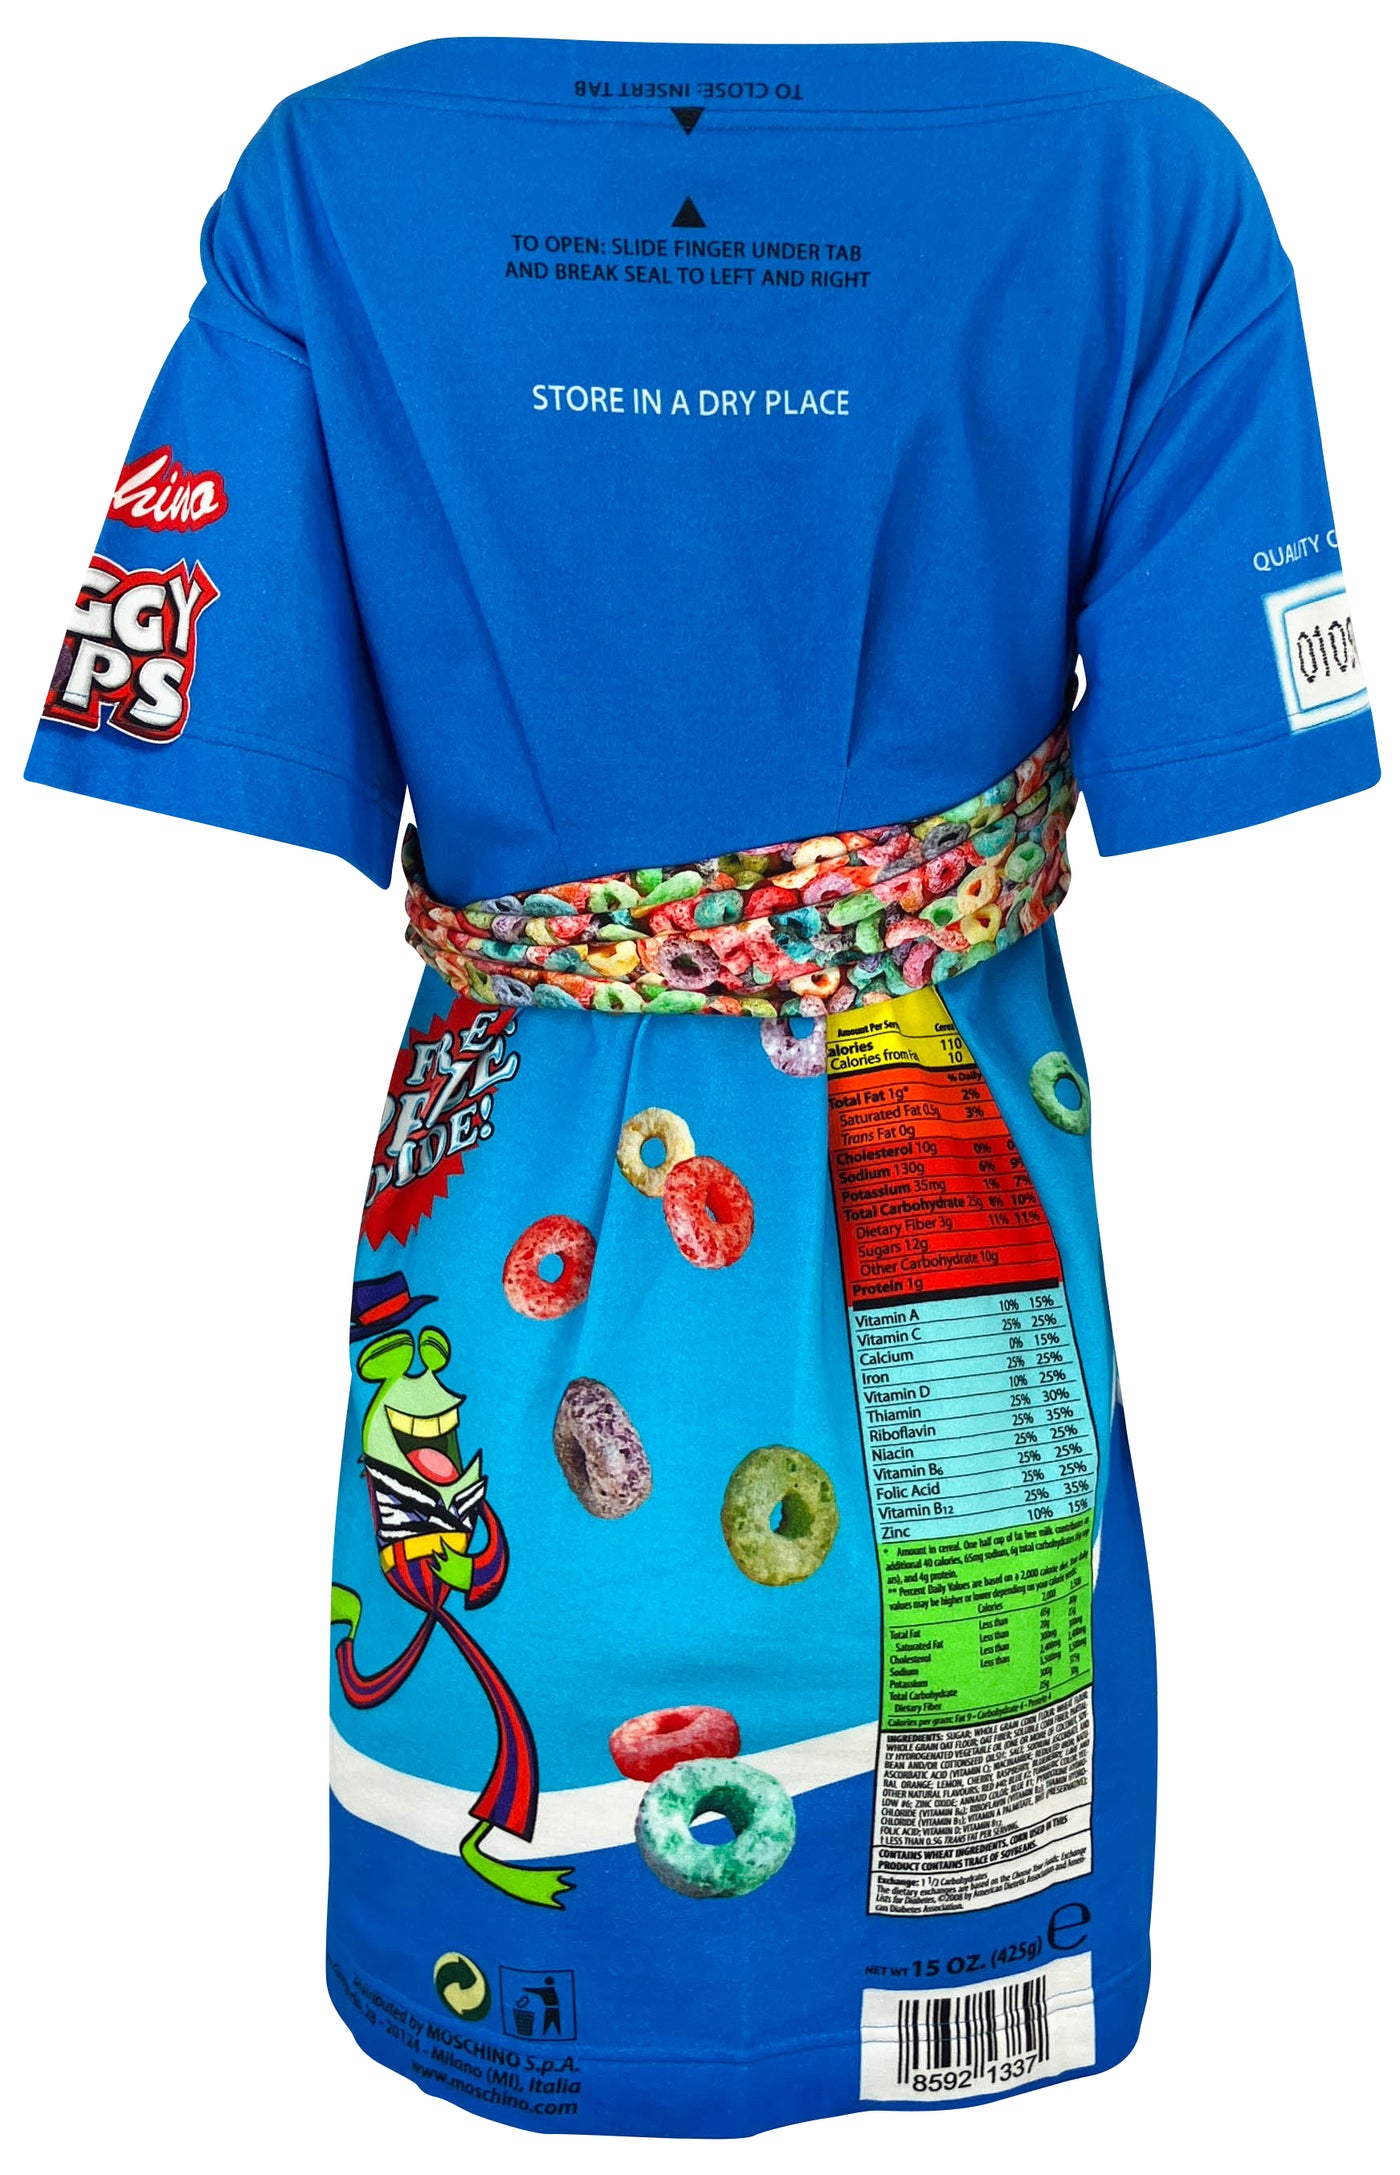 Moschino Froggy Loops Dress in Blue Multi - Discounts on Moschino at UAL